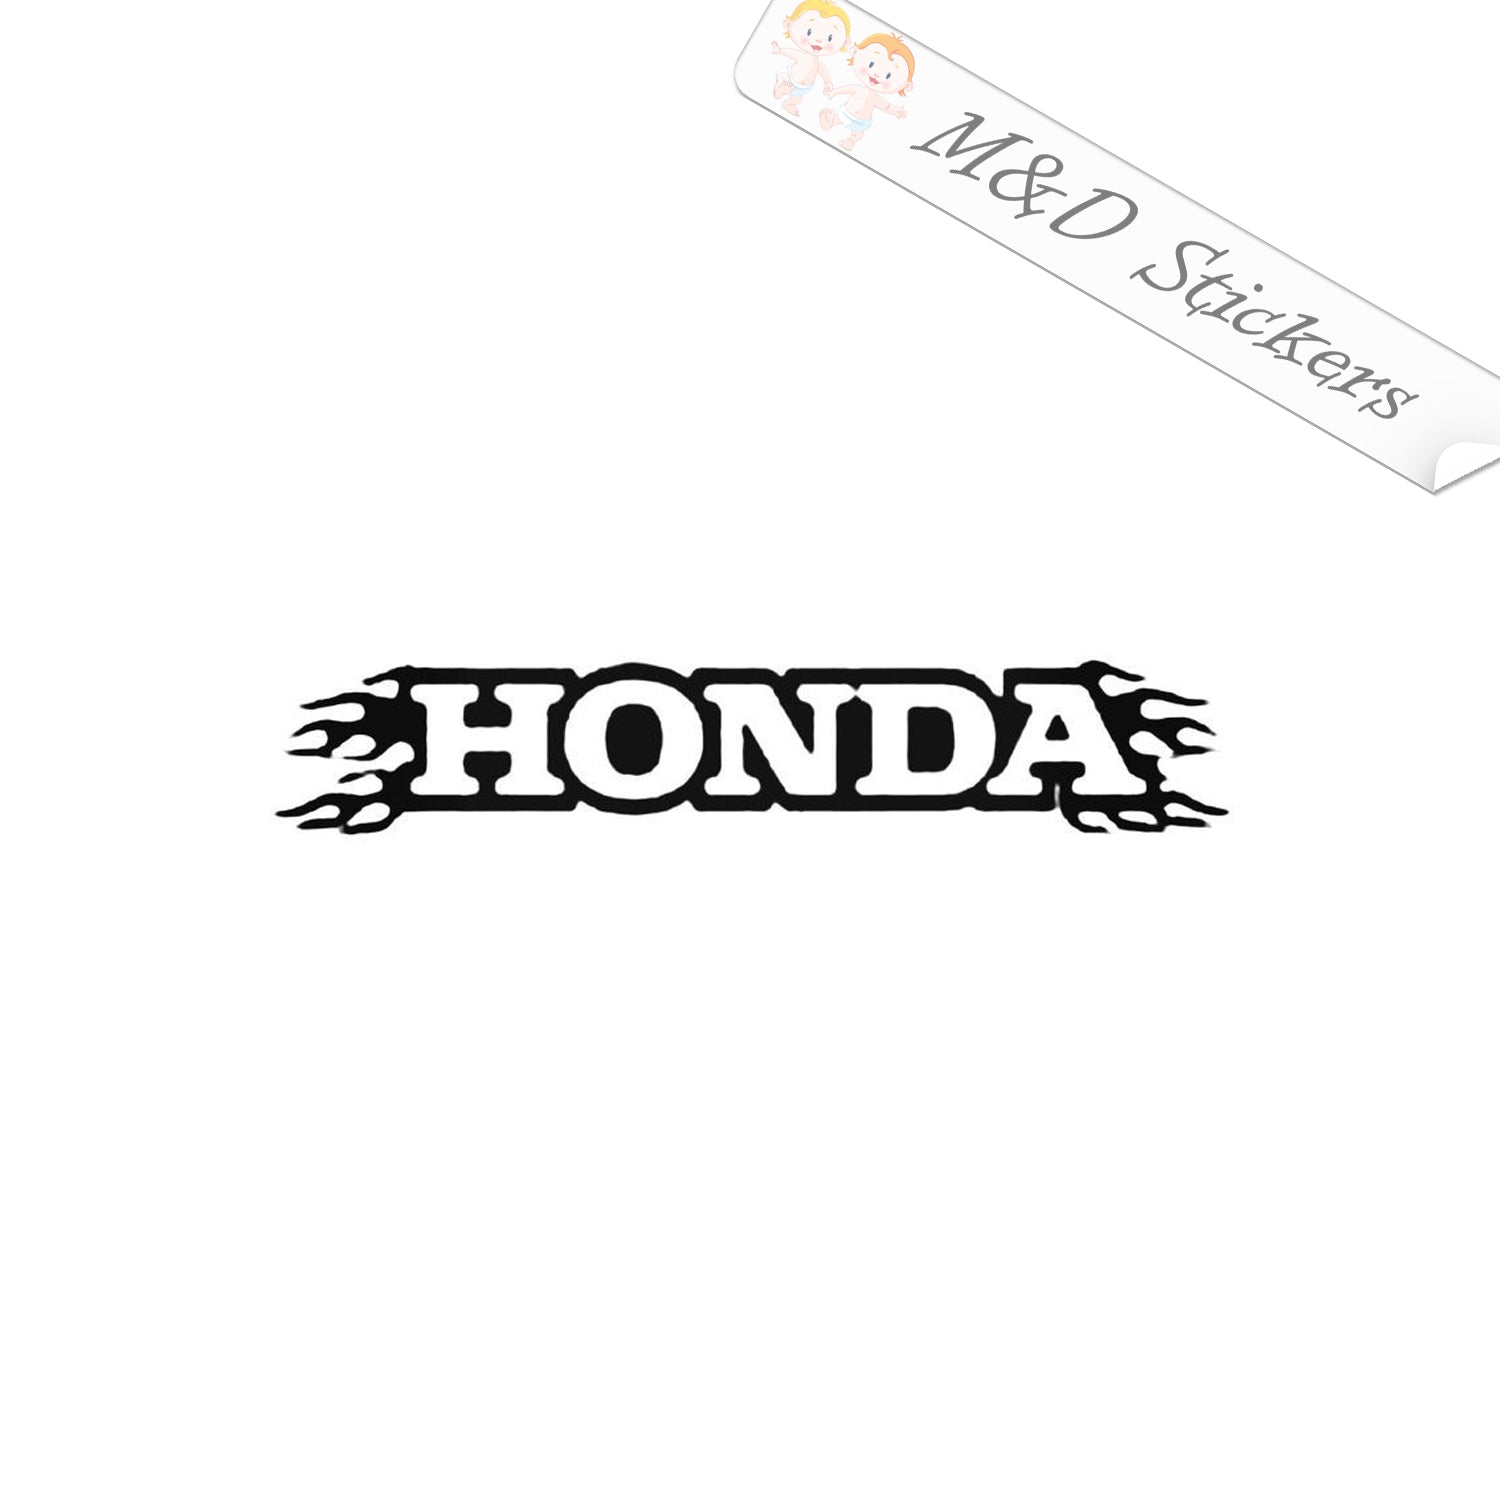 2x Honda Logo Vinyl Decal Sticker Different colors & size for Cars